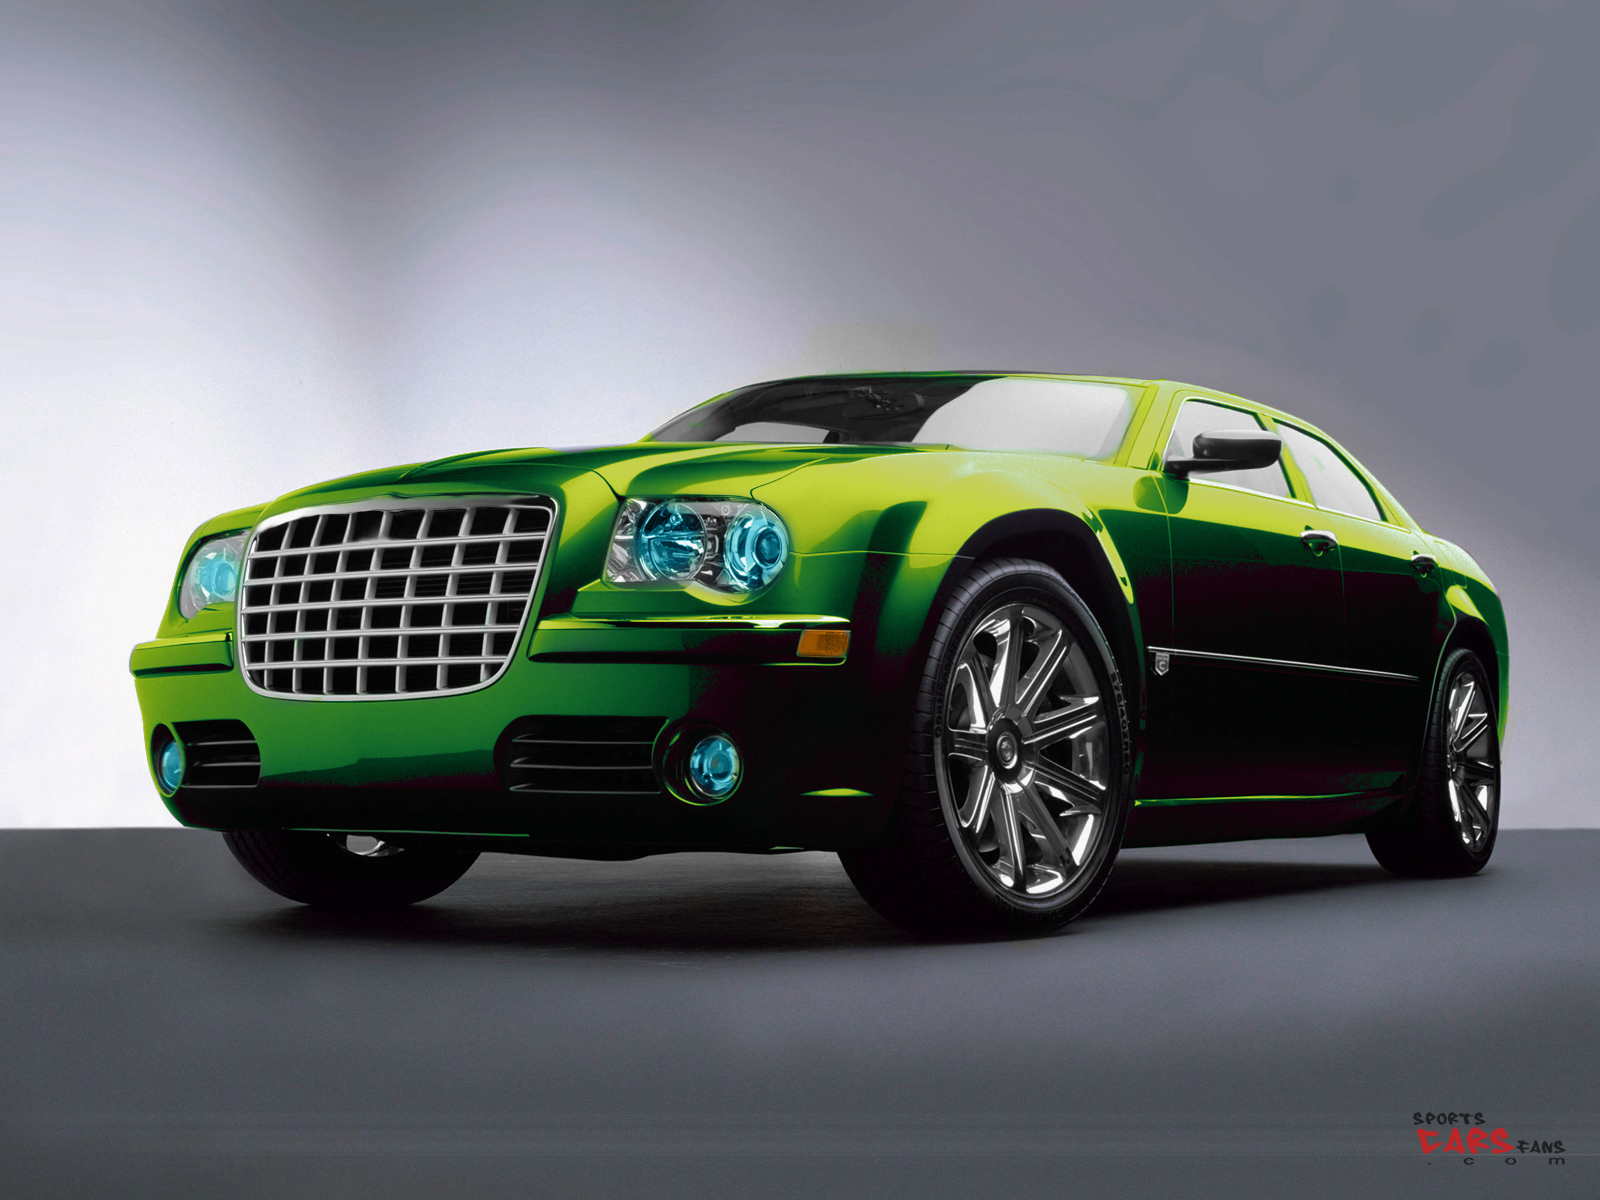 Wallpapers Facebook Cover Animated Car Wallpaper: cool cars wallpapers